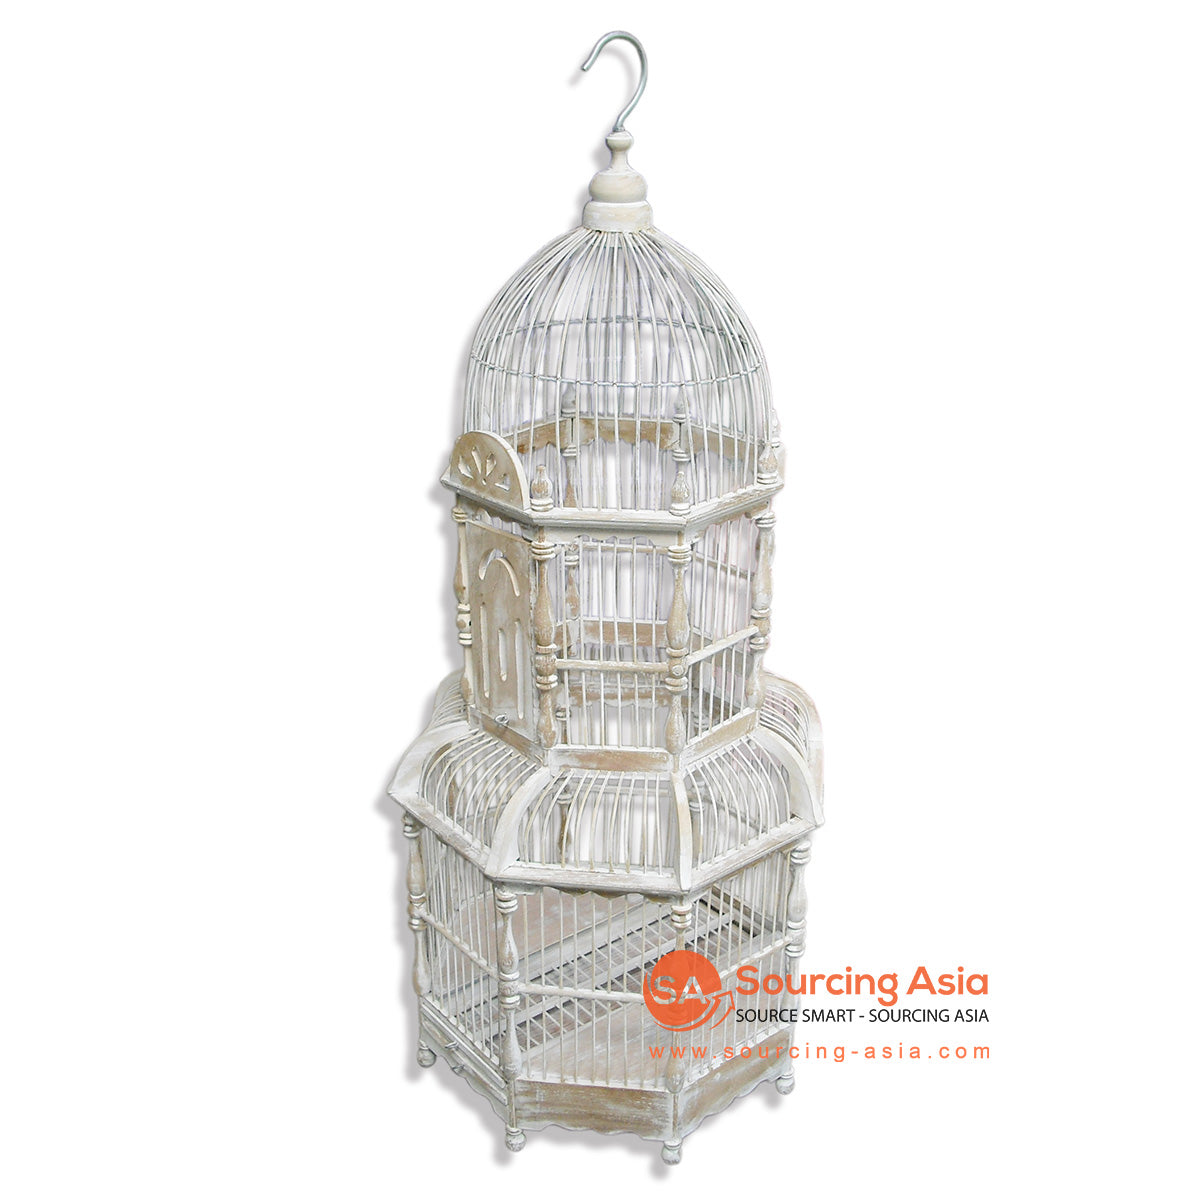 SM028 WHITE WASH WOODEN BIRD CAGE WITH PAGODA SHAPE